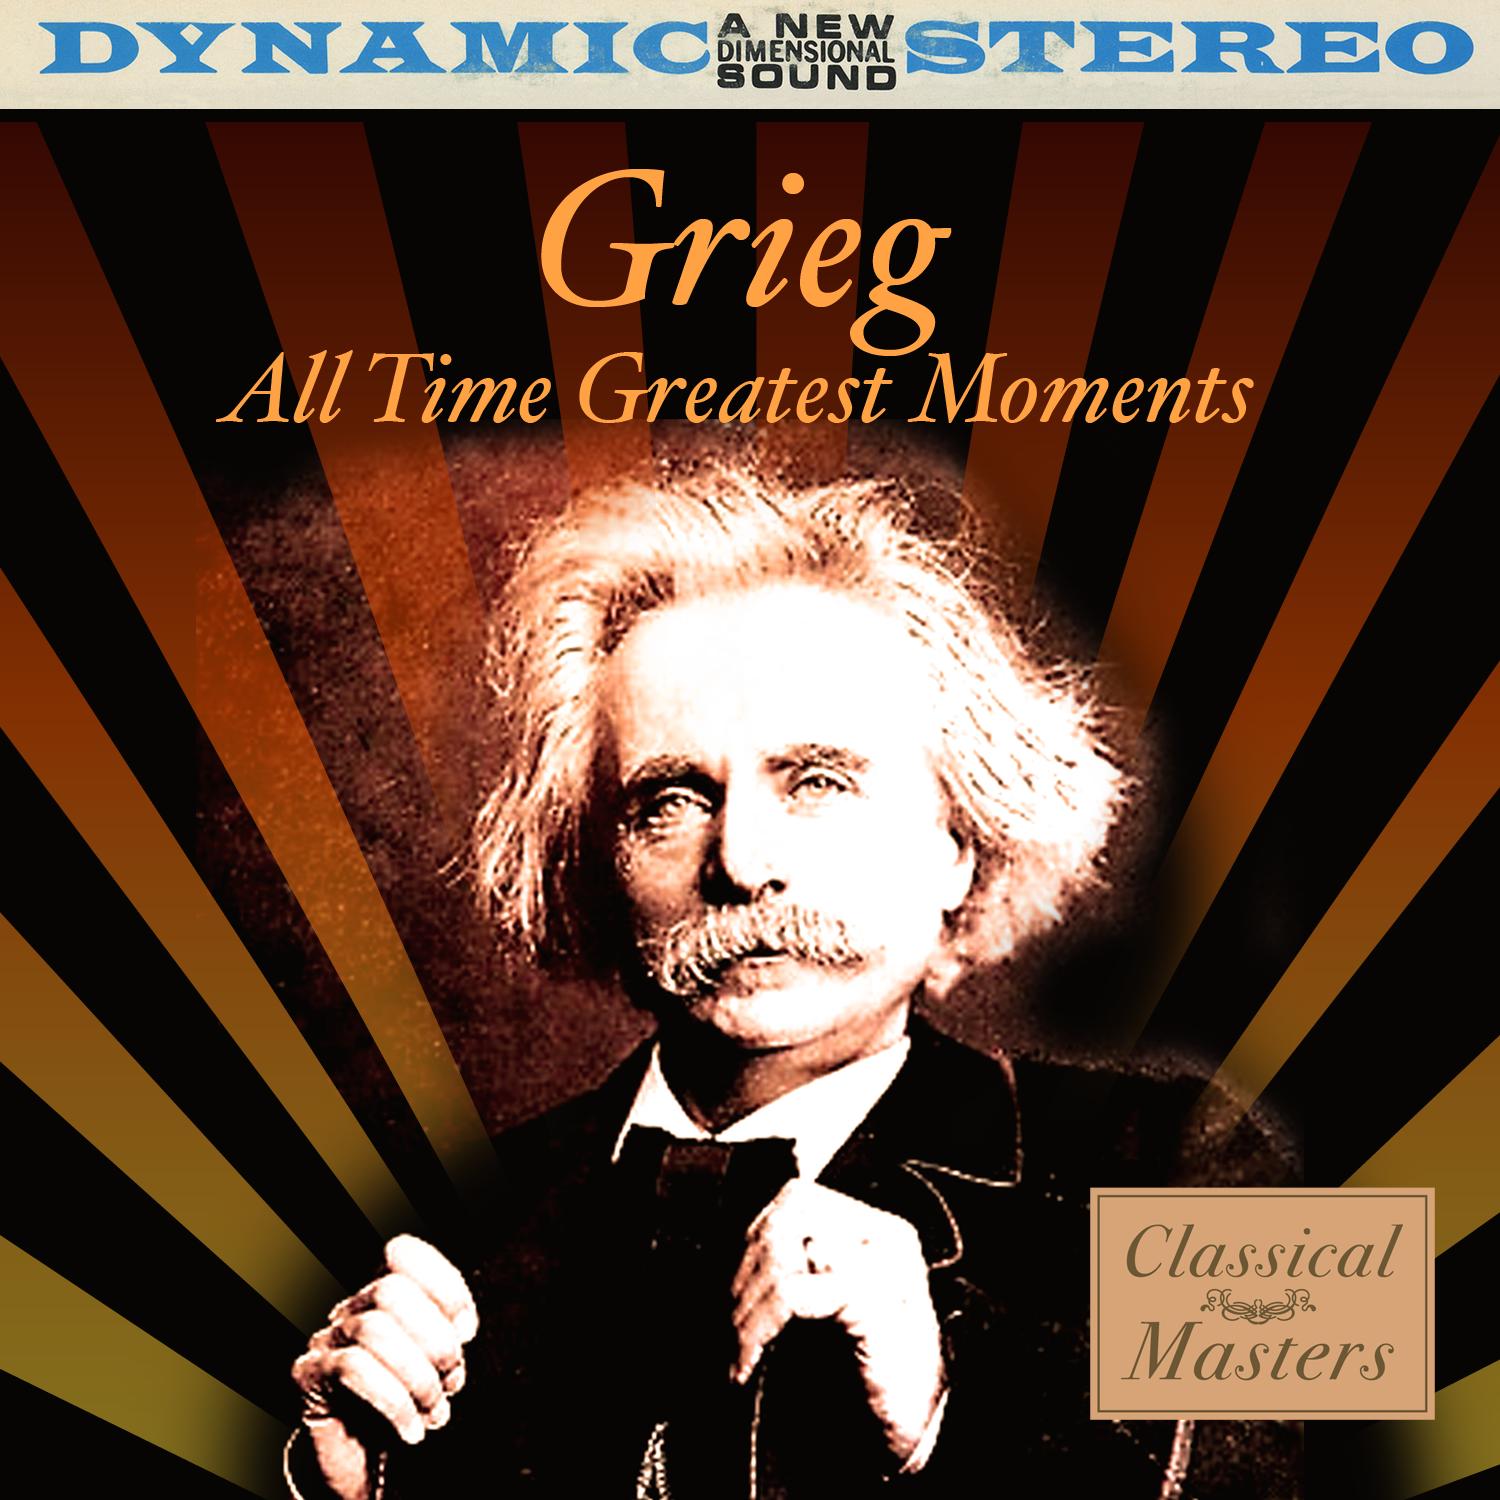 Grieg: All Time Greatest Moments